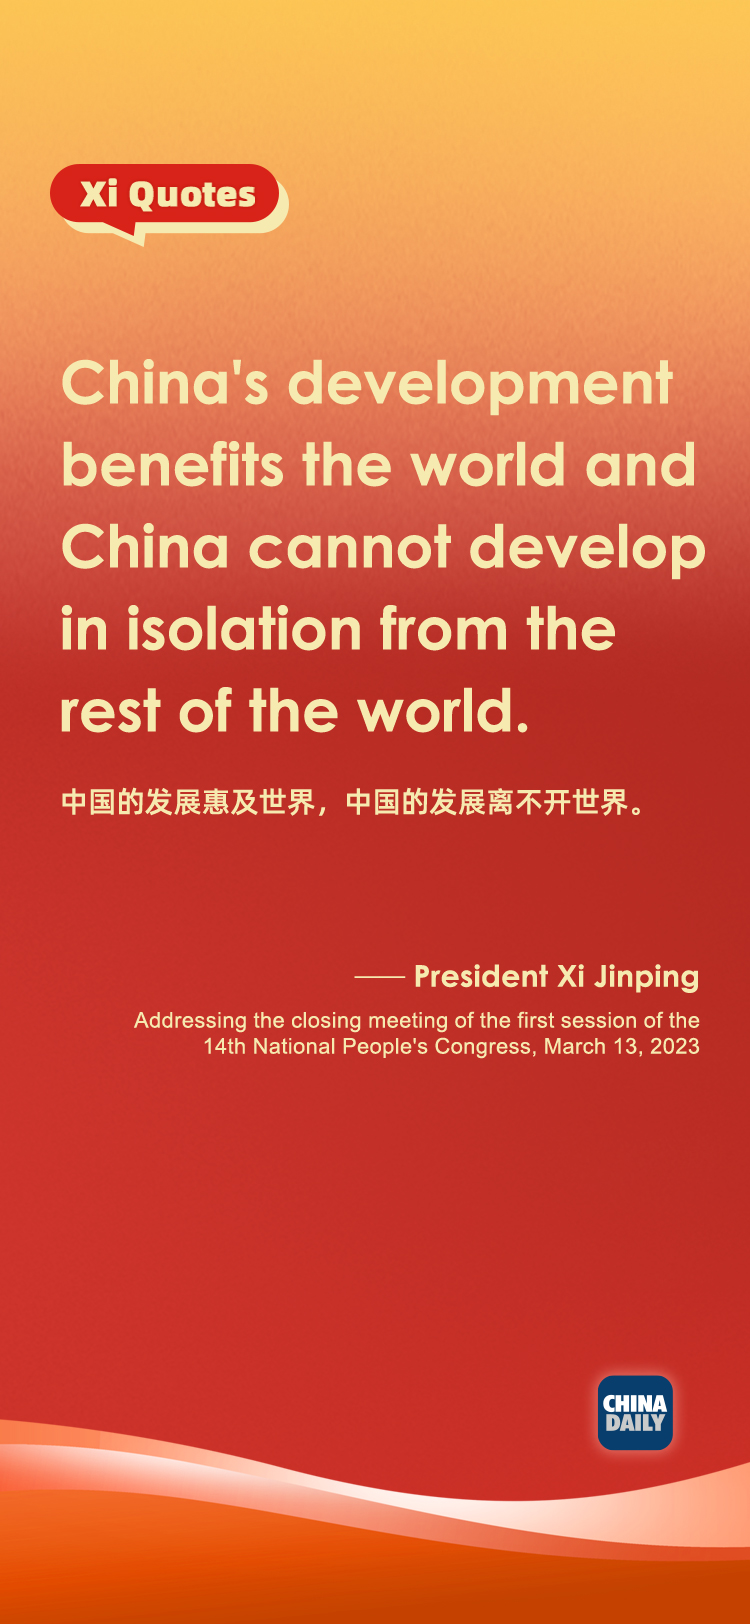 Quotes from Xi's speech at closing meeting of NPC session